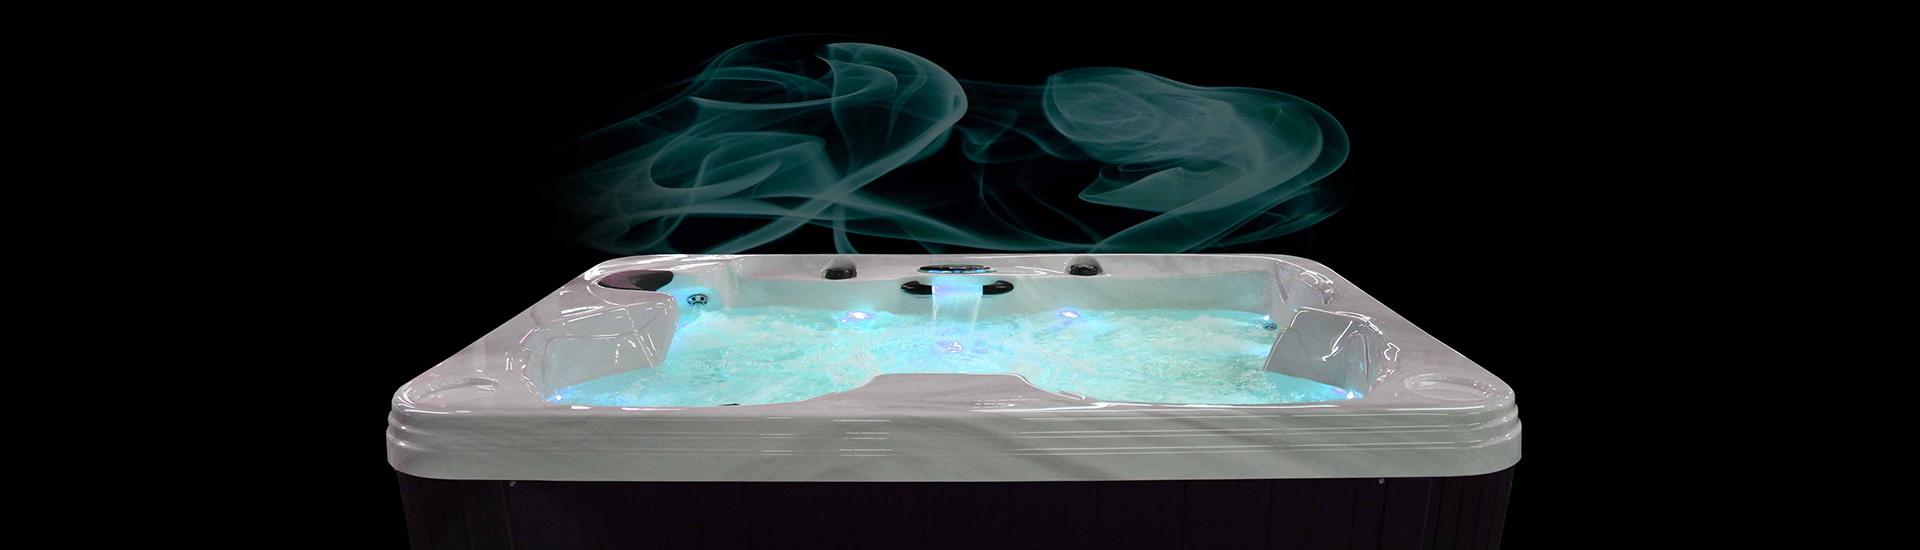 Coast Spas Patio Hot Tub at night with glowing lights